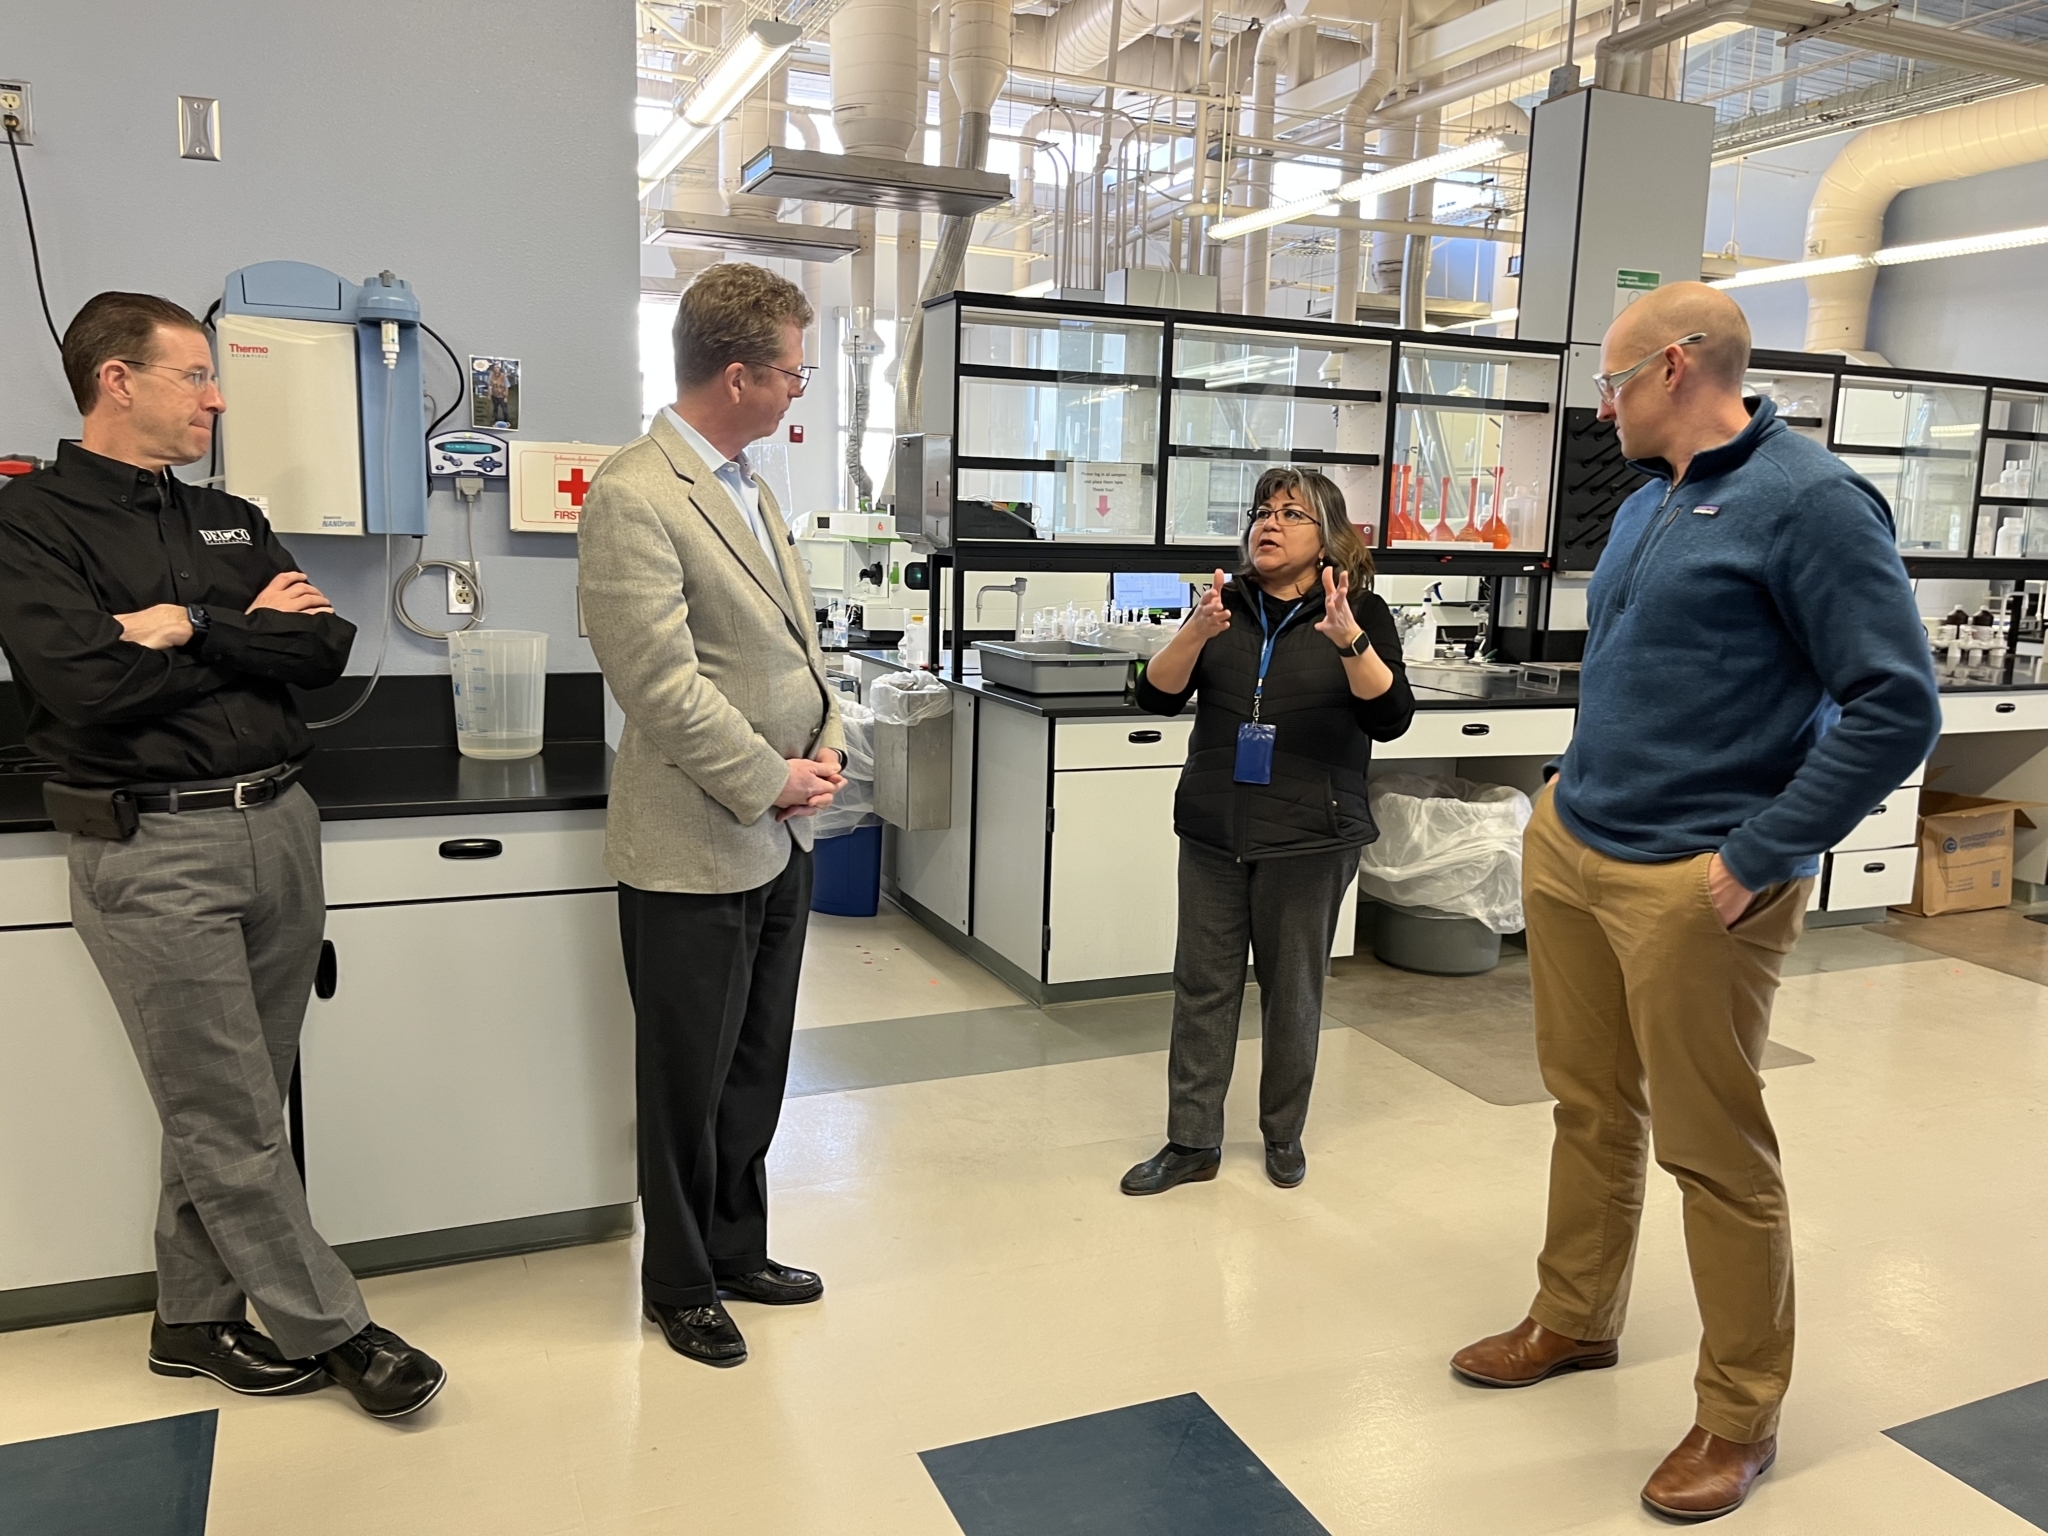 Members of the Association of Regional Water Organization tour the TecH2O Center lab.